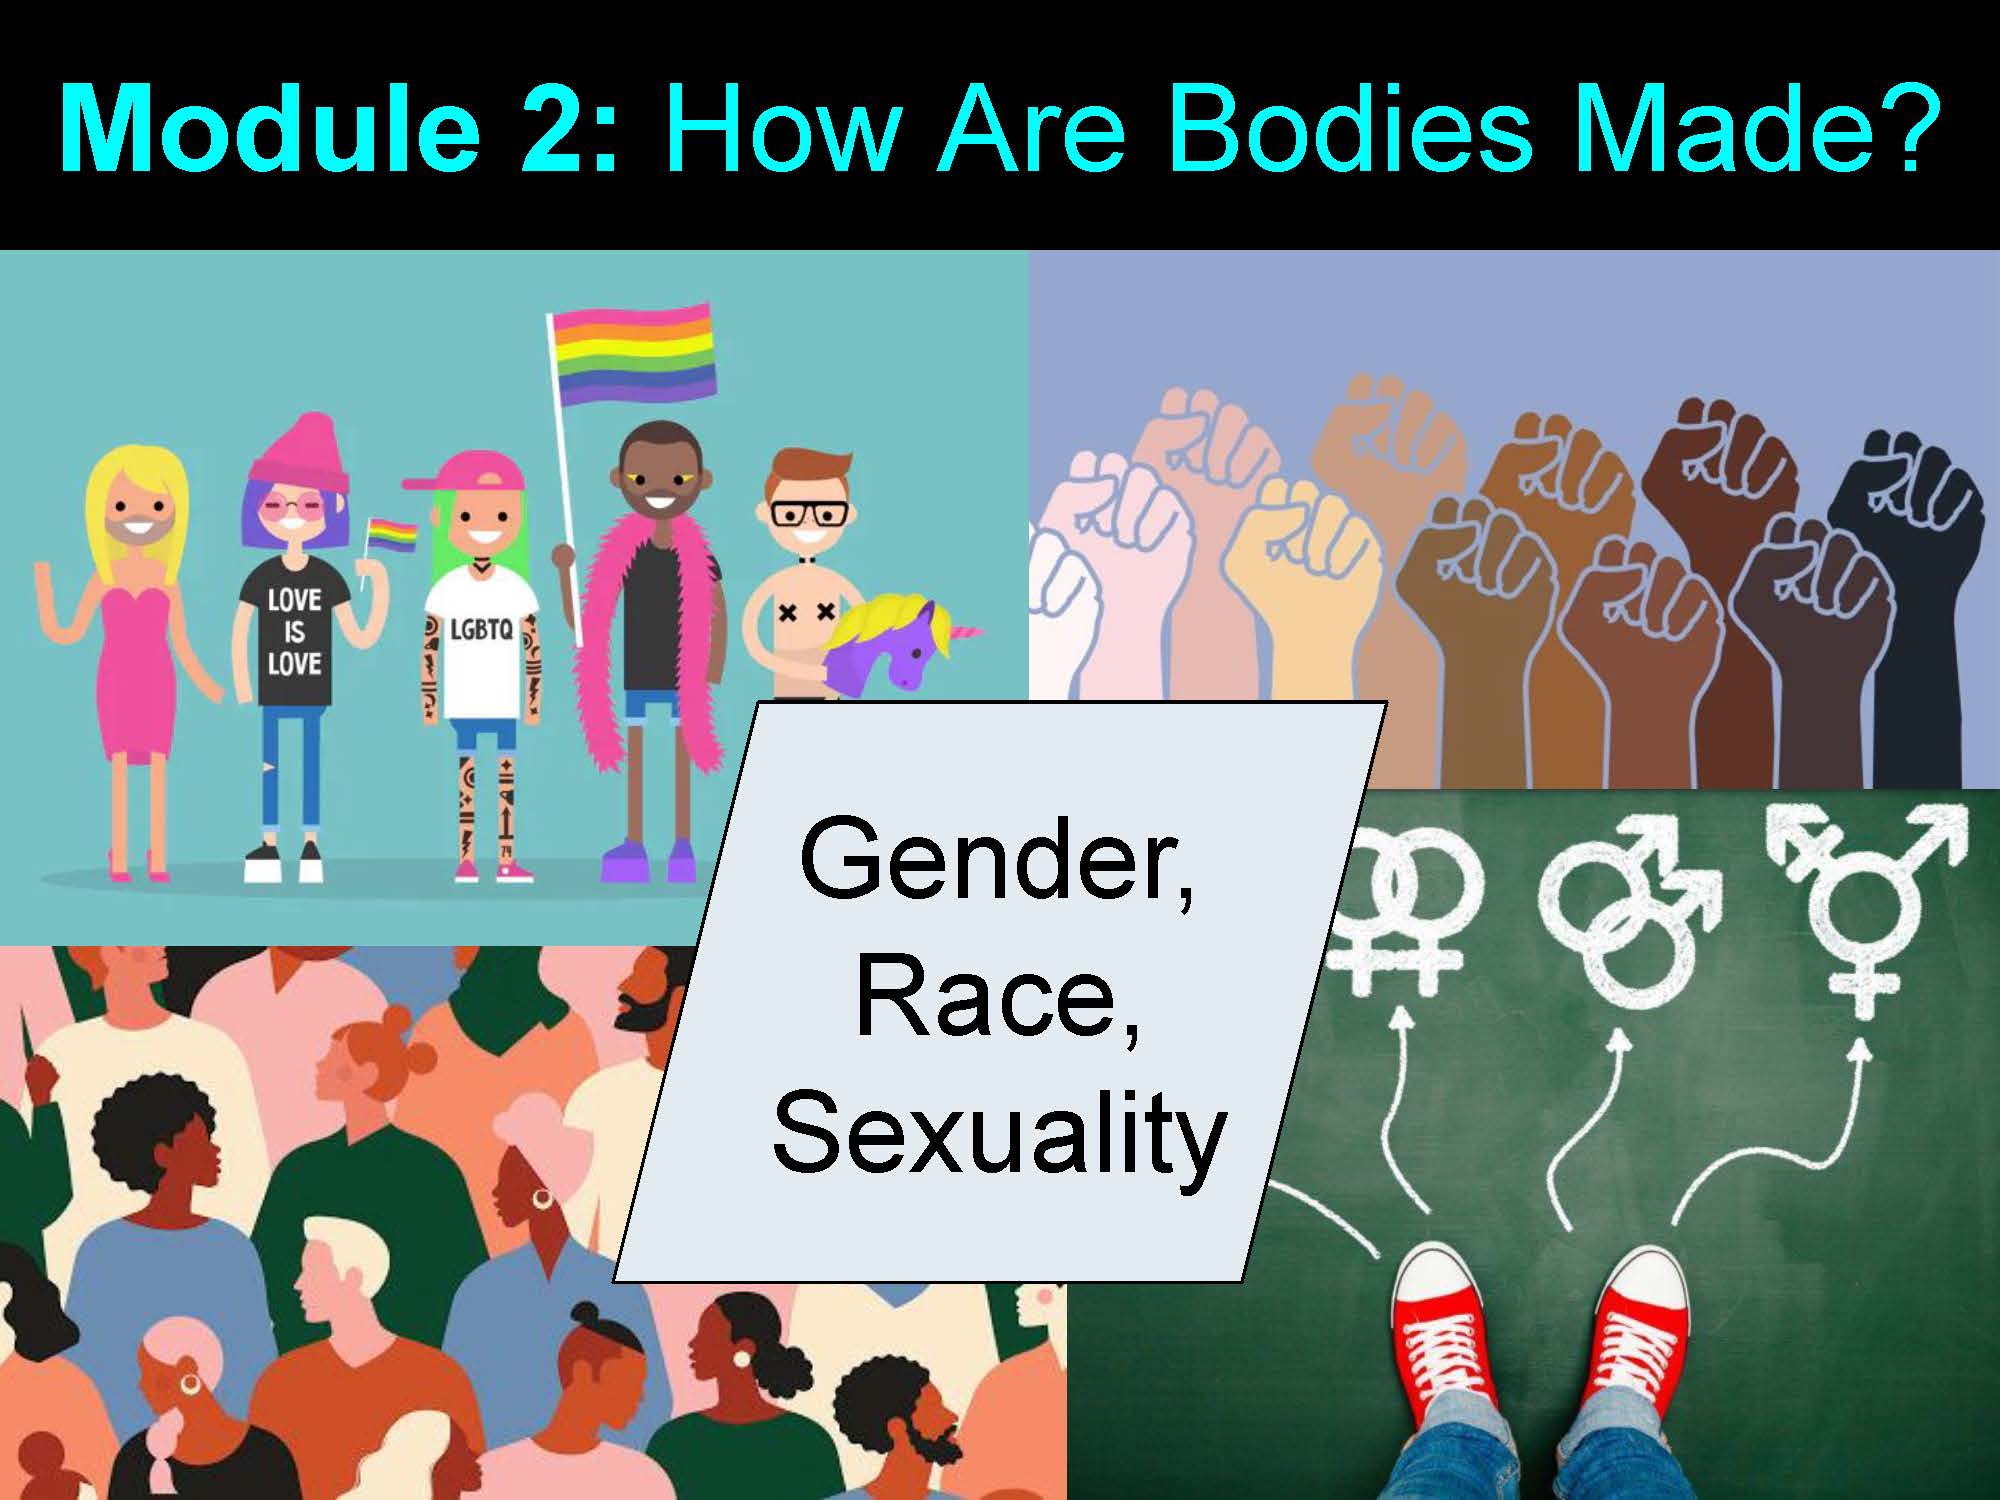 Module 2: How are bodies made?